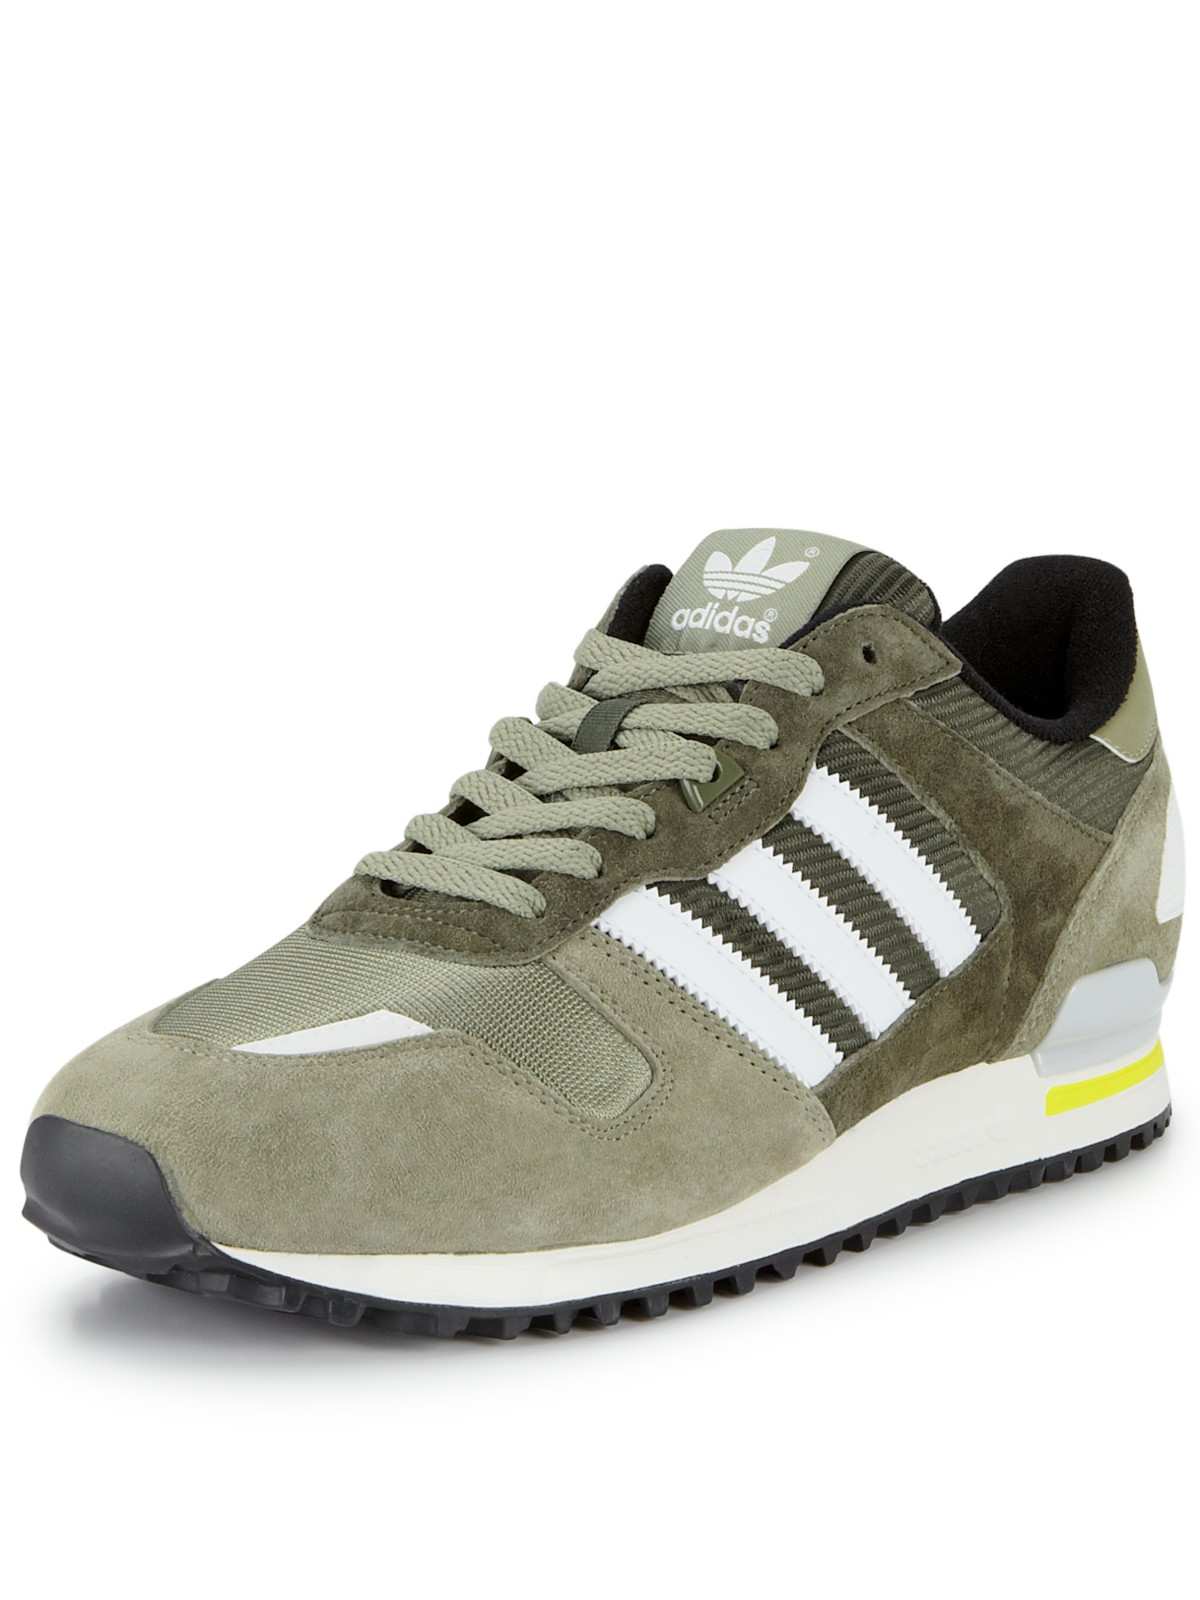 Adidas Adidas Originals Zx700 Mens Trainers in Green for Men (green ...